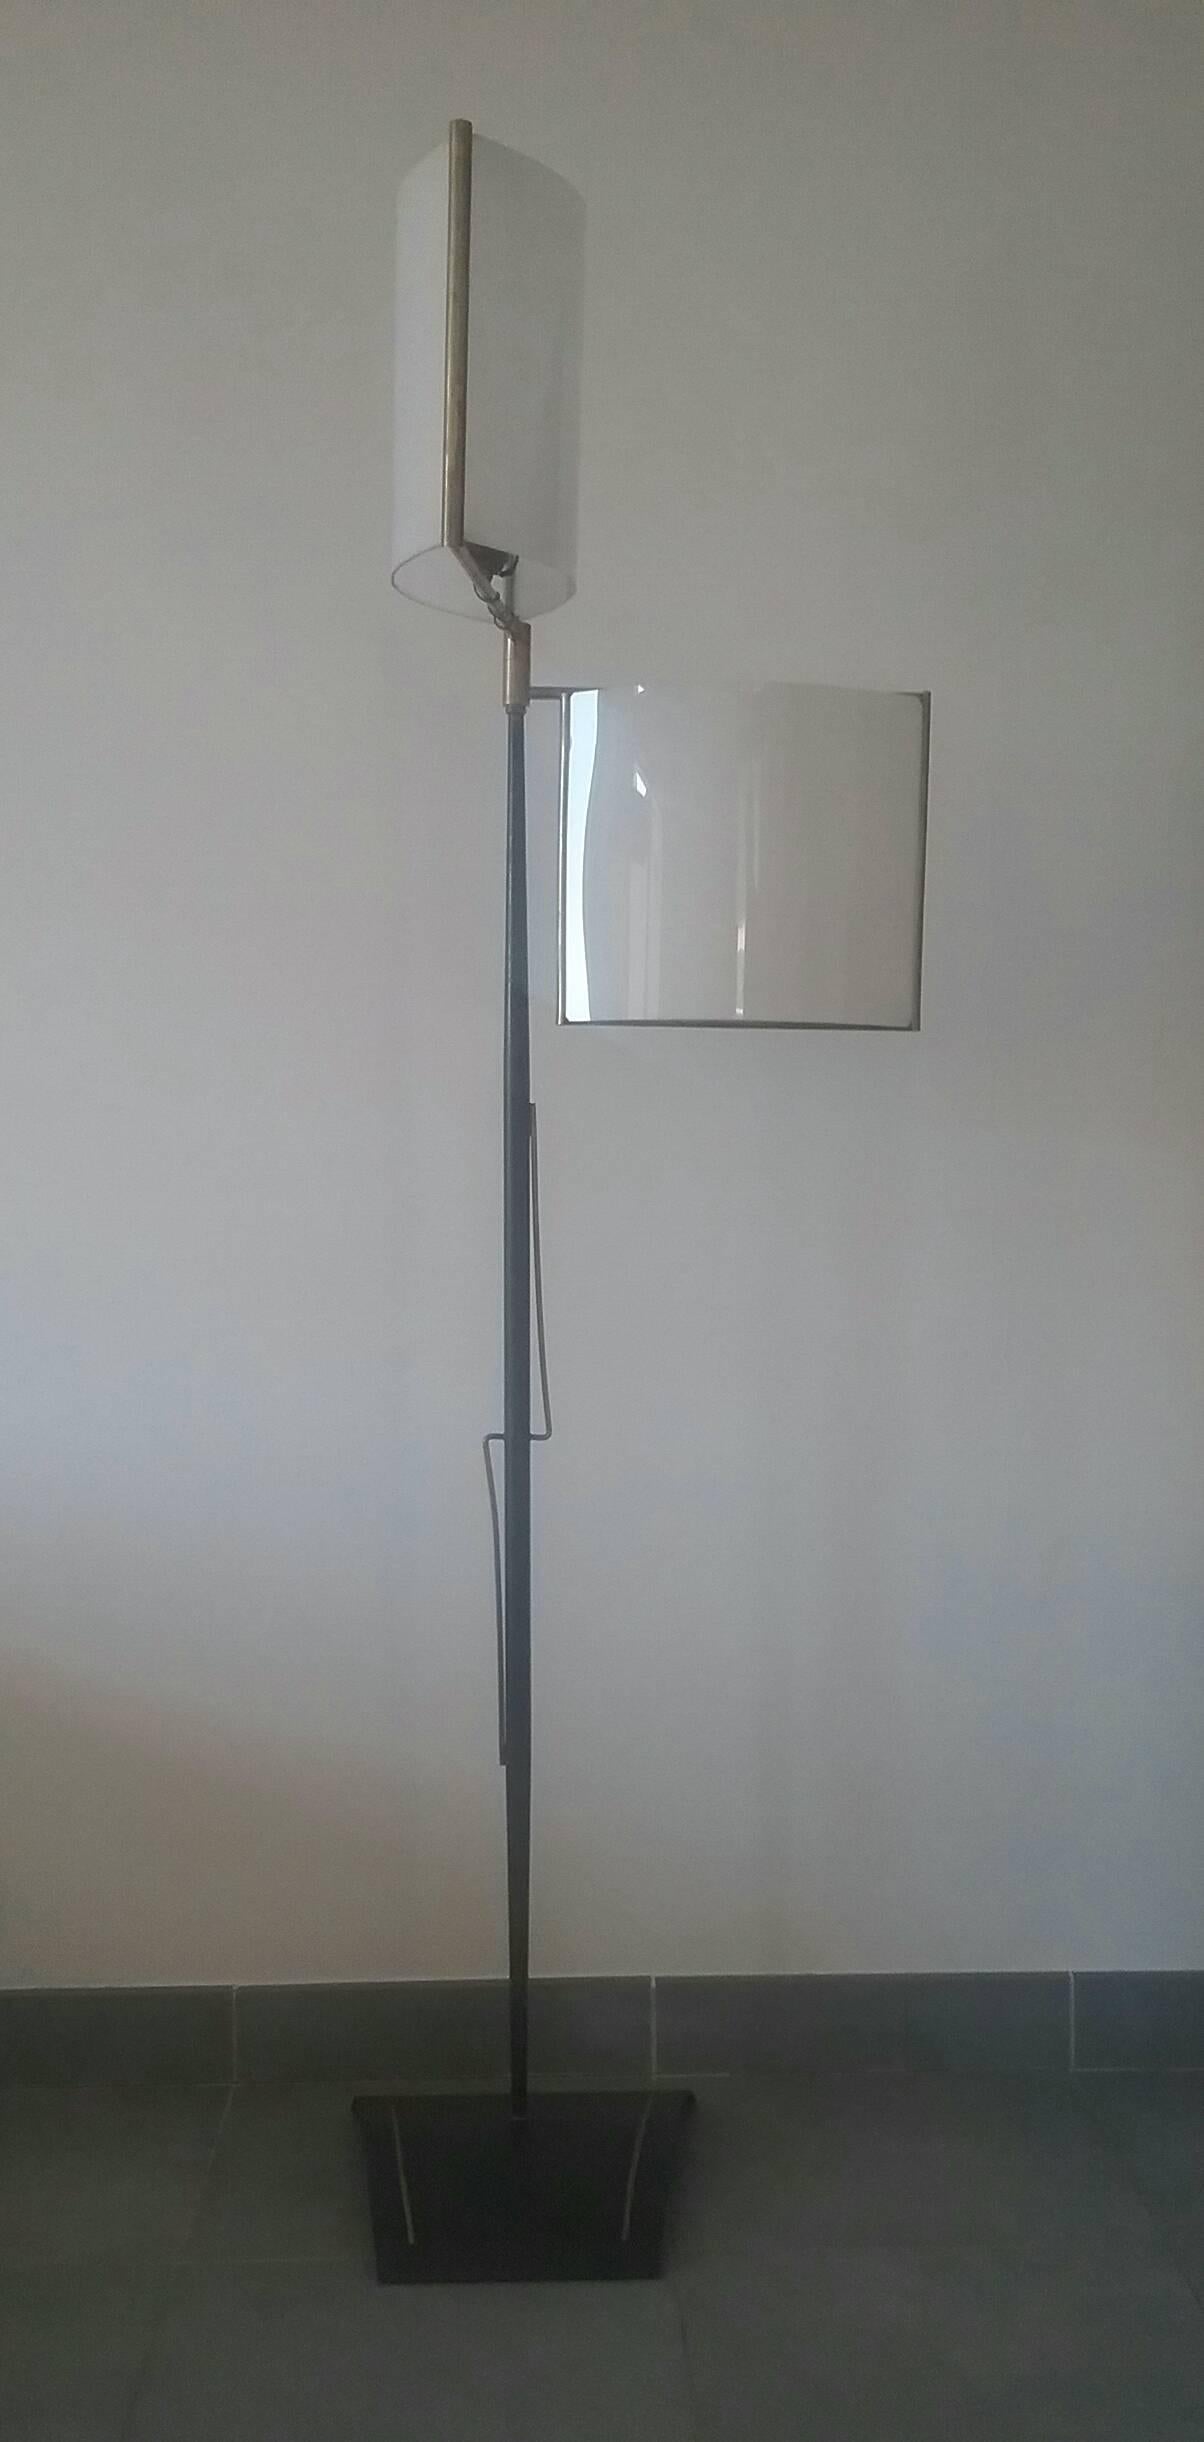 Rare brass and black painted metal floor lamp. Two adjustable perspex shades may be placed in different positions.
It looks like more a lighted sculpture than a simple floor lamp.
The use of the perspex calls back the work of Jacques